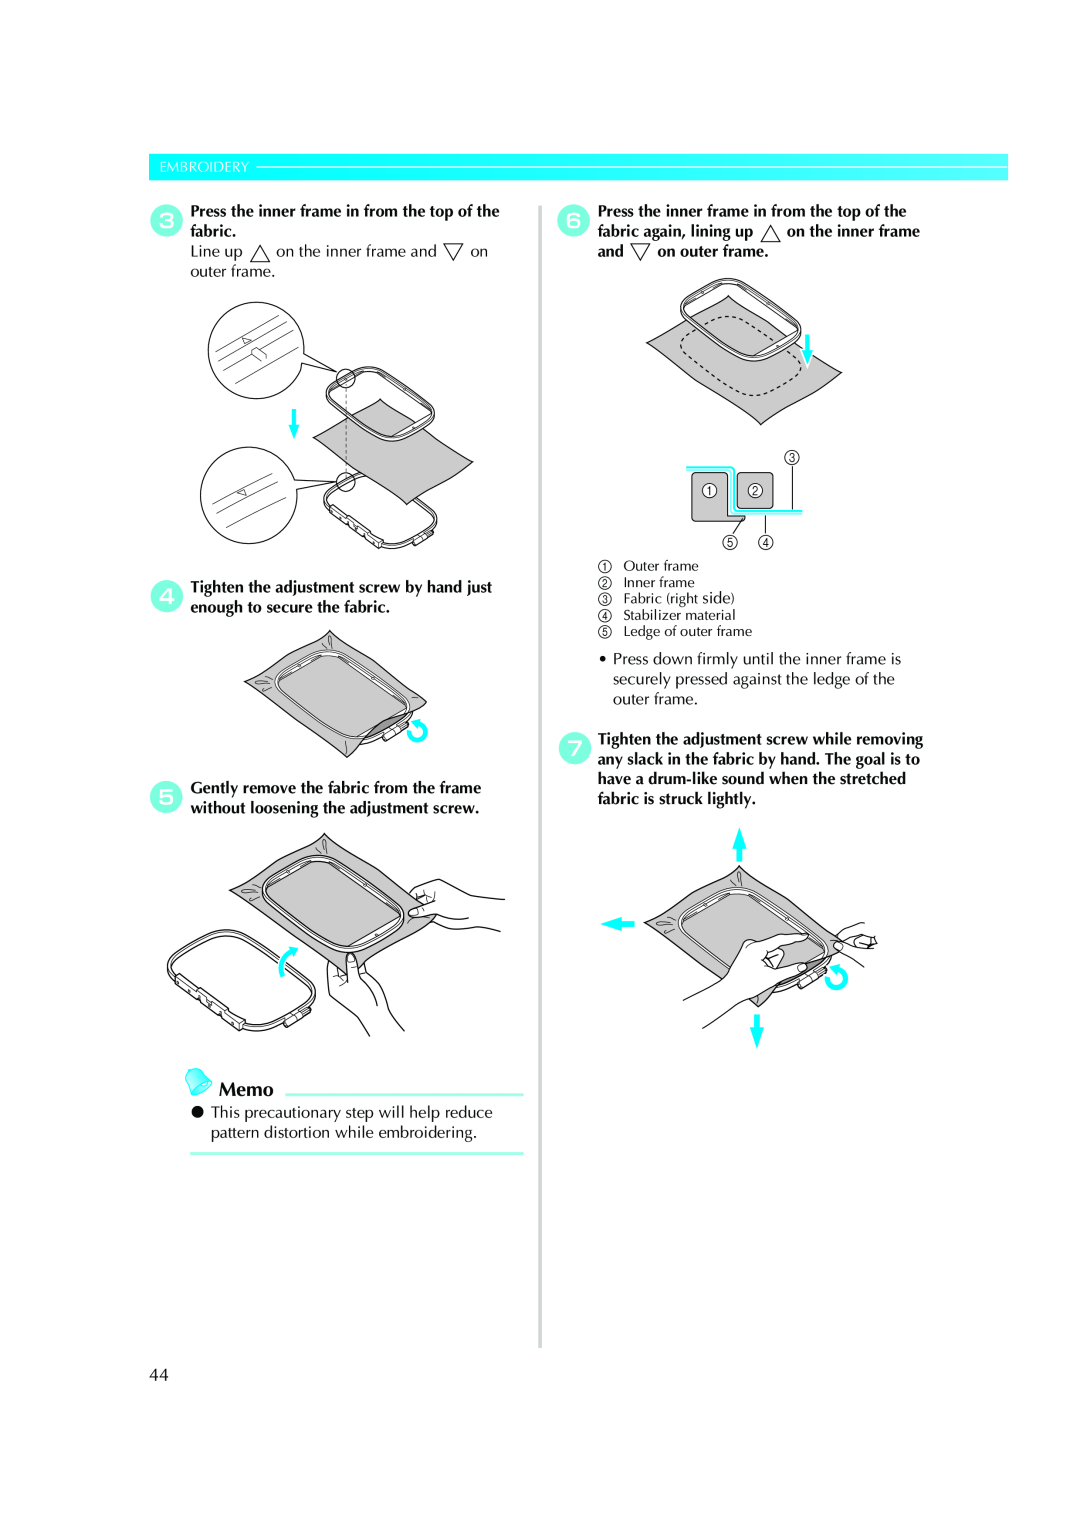 Brother Computerized Embroidery Machine operation manual Memo, cPressfabric.the inner frame in from the top of the 